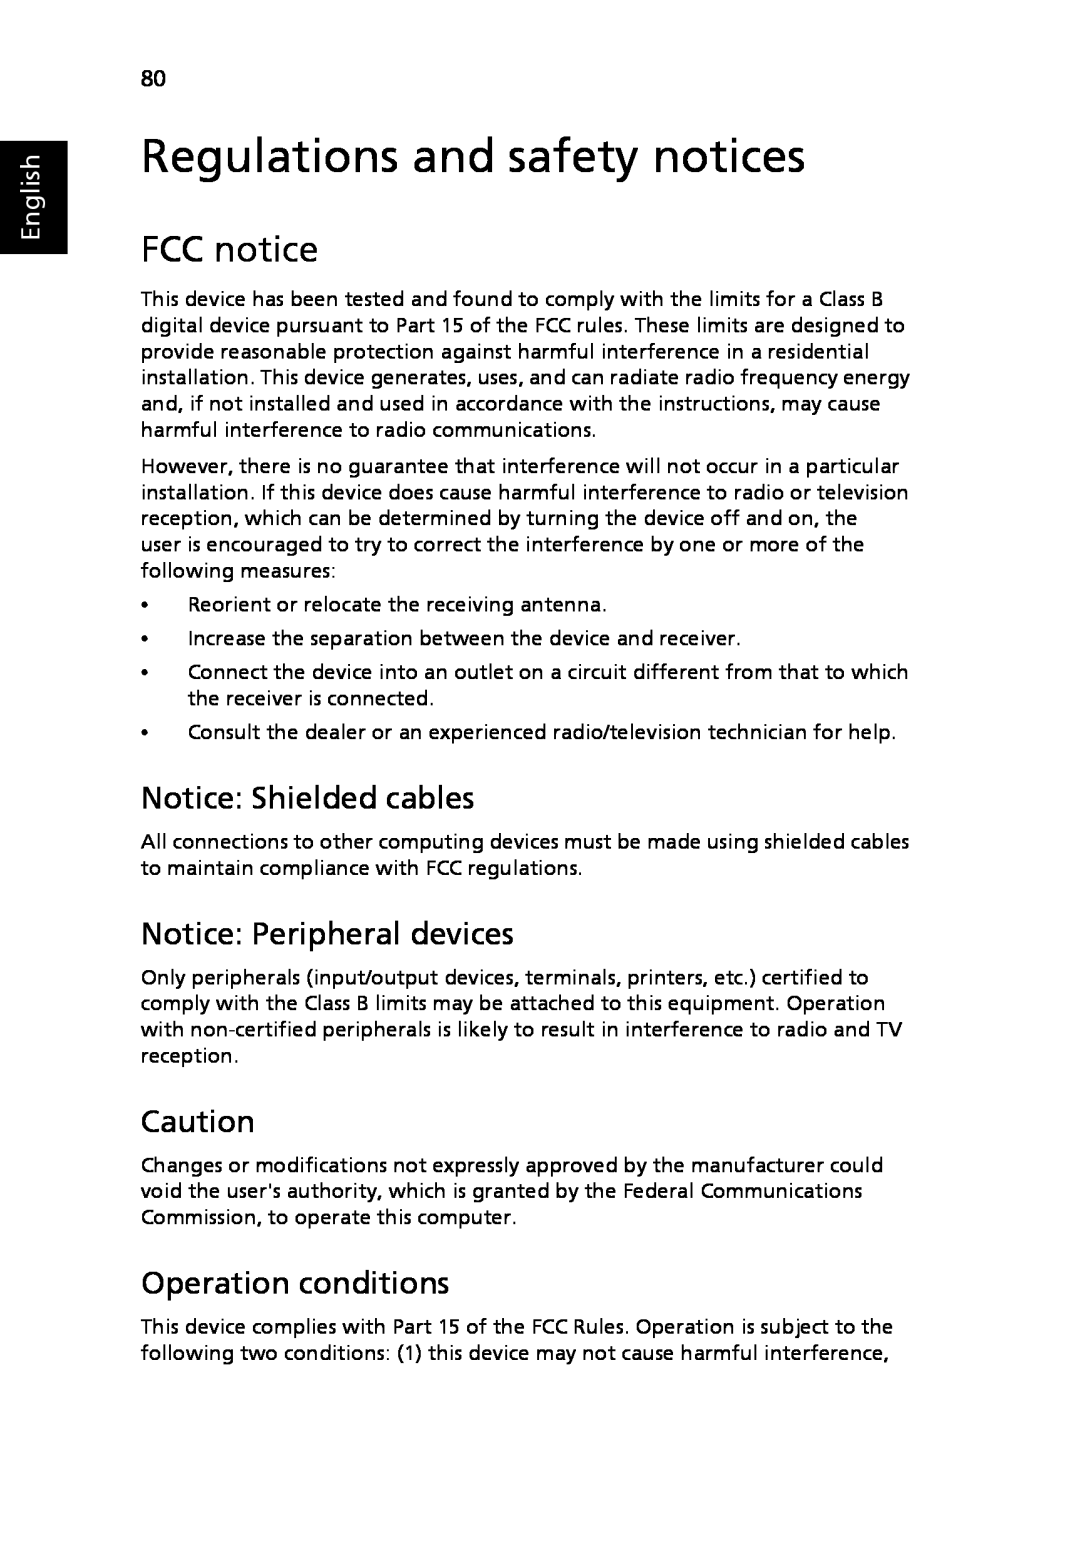 Acer 5410 Series Regulations and safety notices, FCC notice, Notice Shielded cables, Notice Peripheral devices, English 